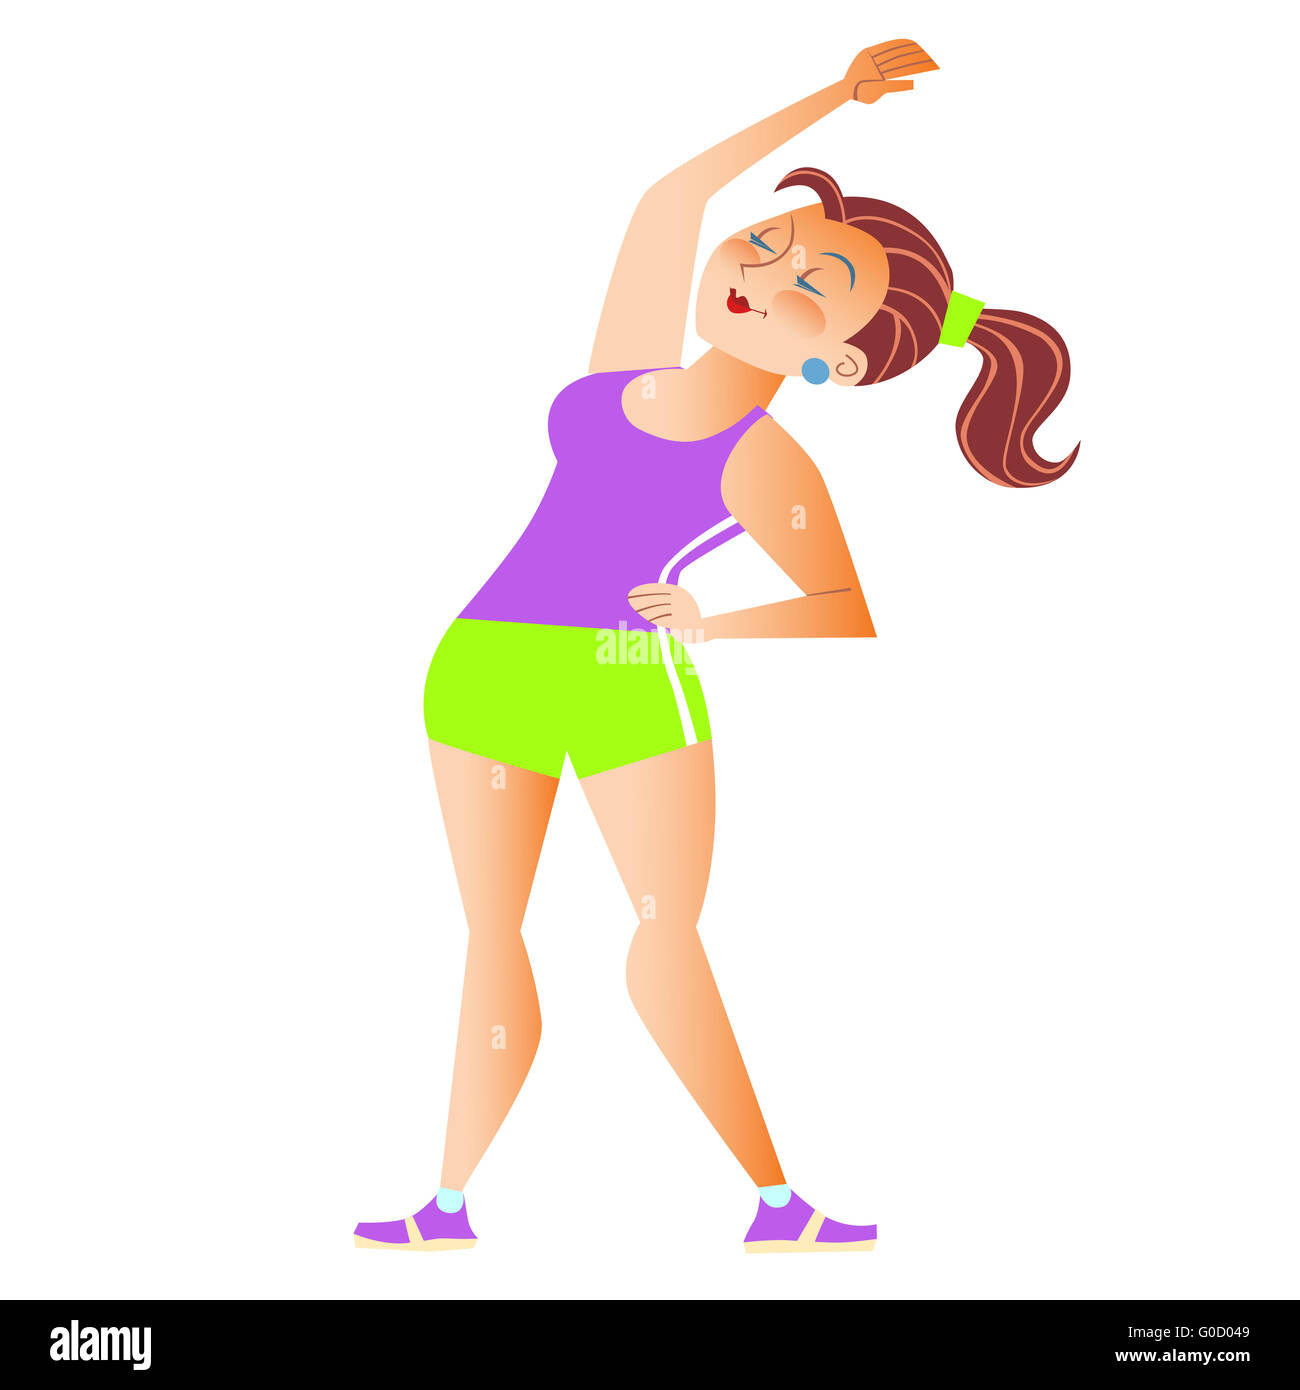 Fat girl doing gymnastics sports physiotherapy Stock Photo